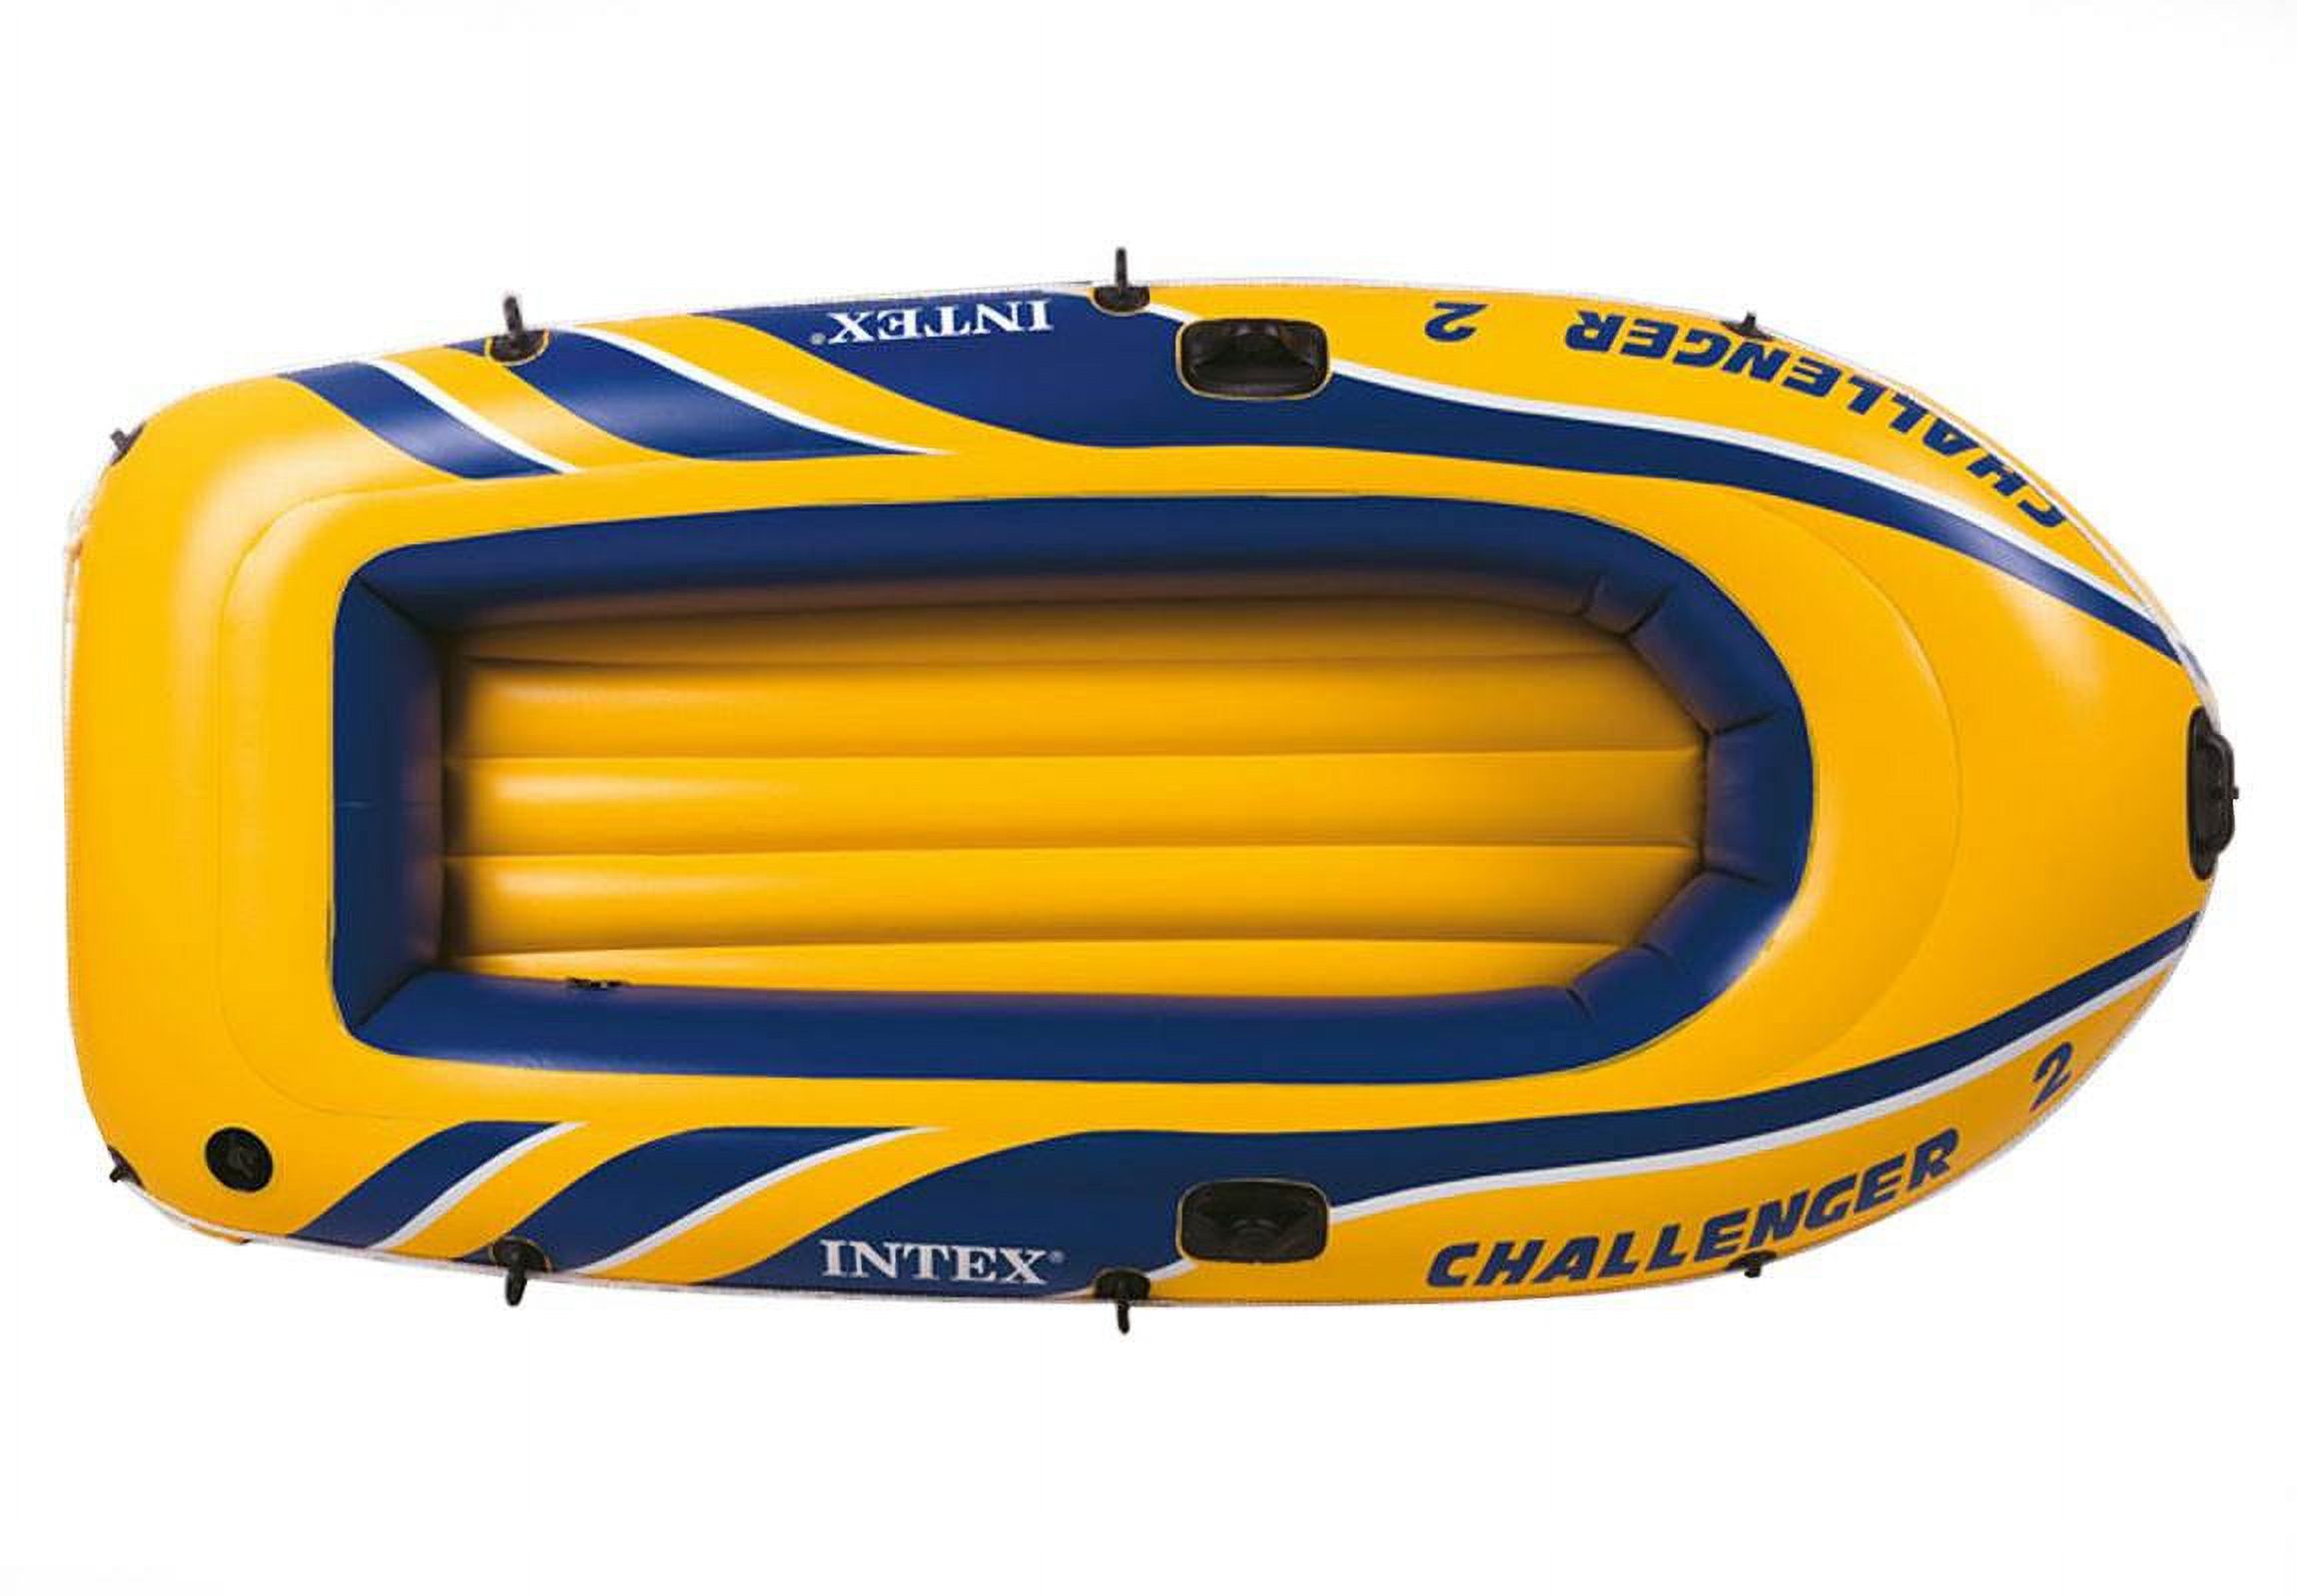 Intex Challenger 2, 2 Person Inflatable Raft with Oars & Air Pump - image 4 of 6